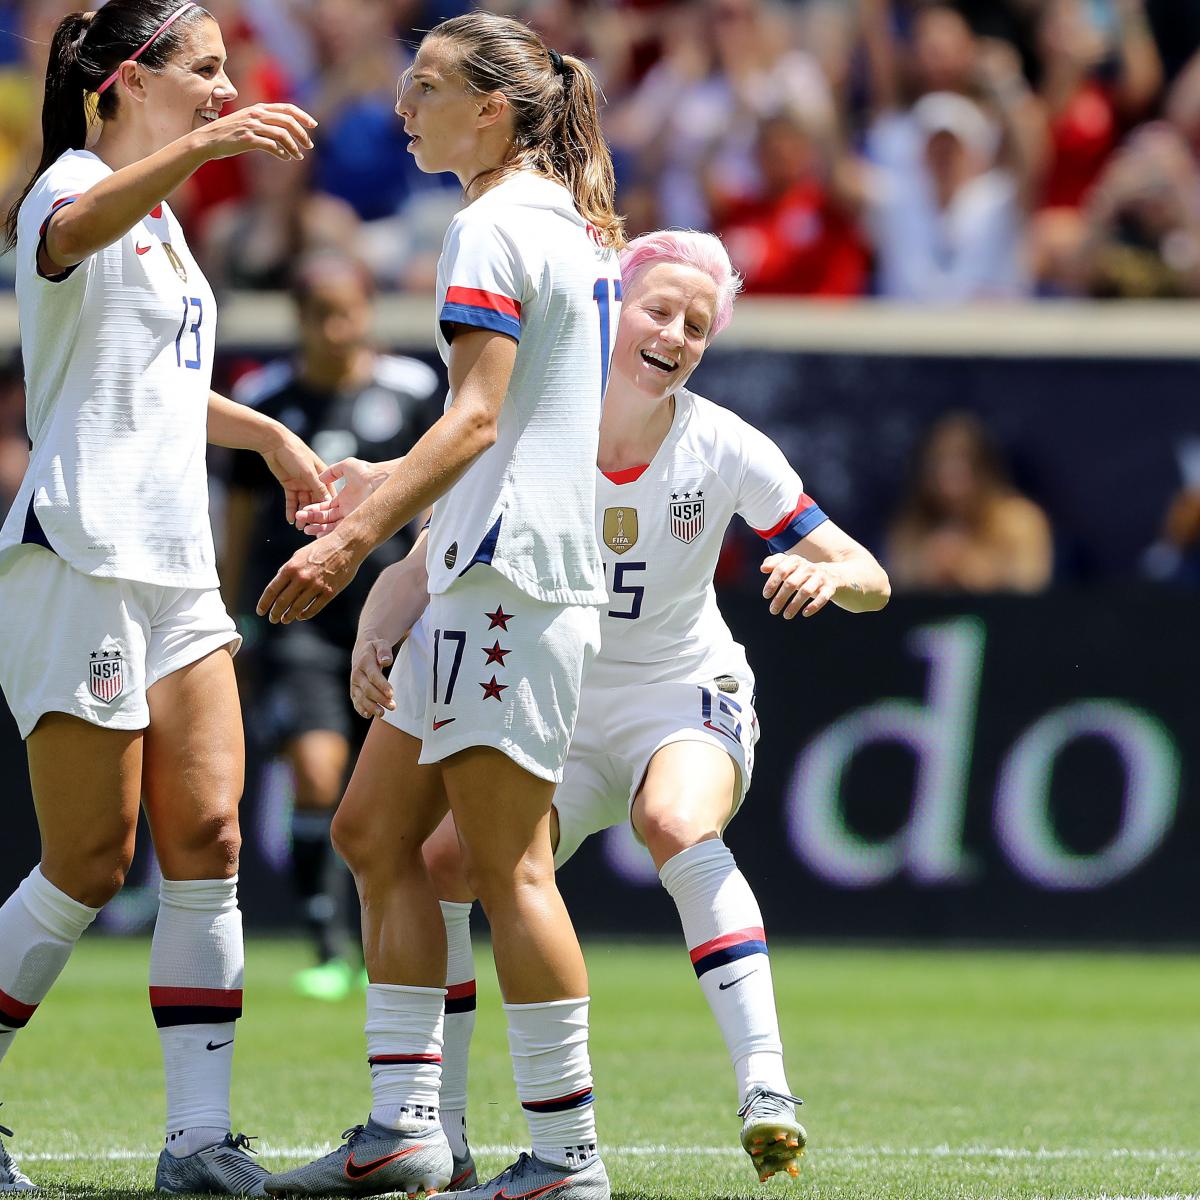 Usa Women S Soccer Roster 19 Uswnt Jerseys Top Players And Reserves Bleacher Report Latest News Videos And Highlights